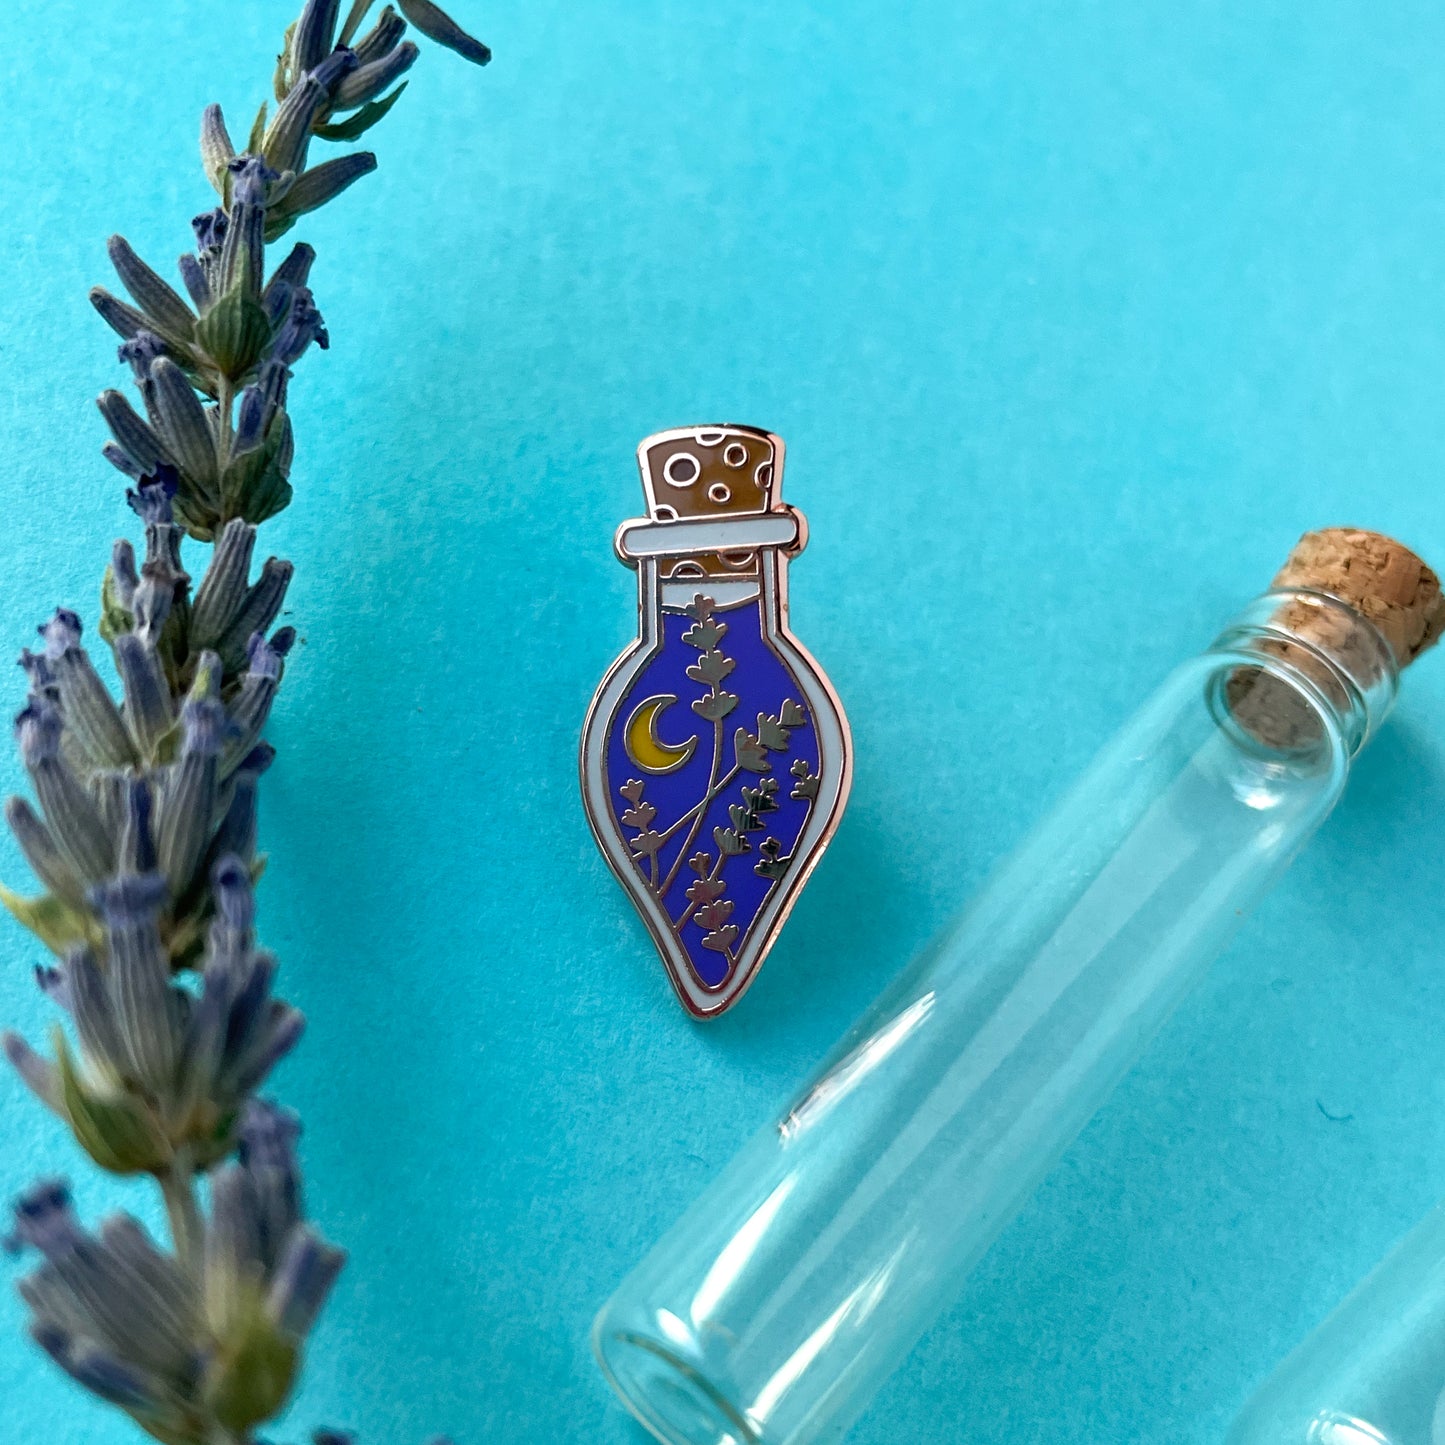 A potion bottle enamel pin on a blue background next to a lavender sprig and a small glass vial.